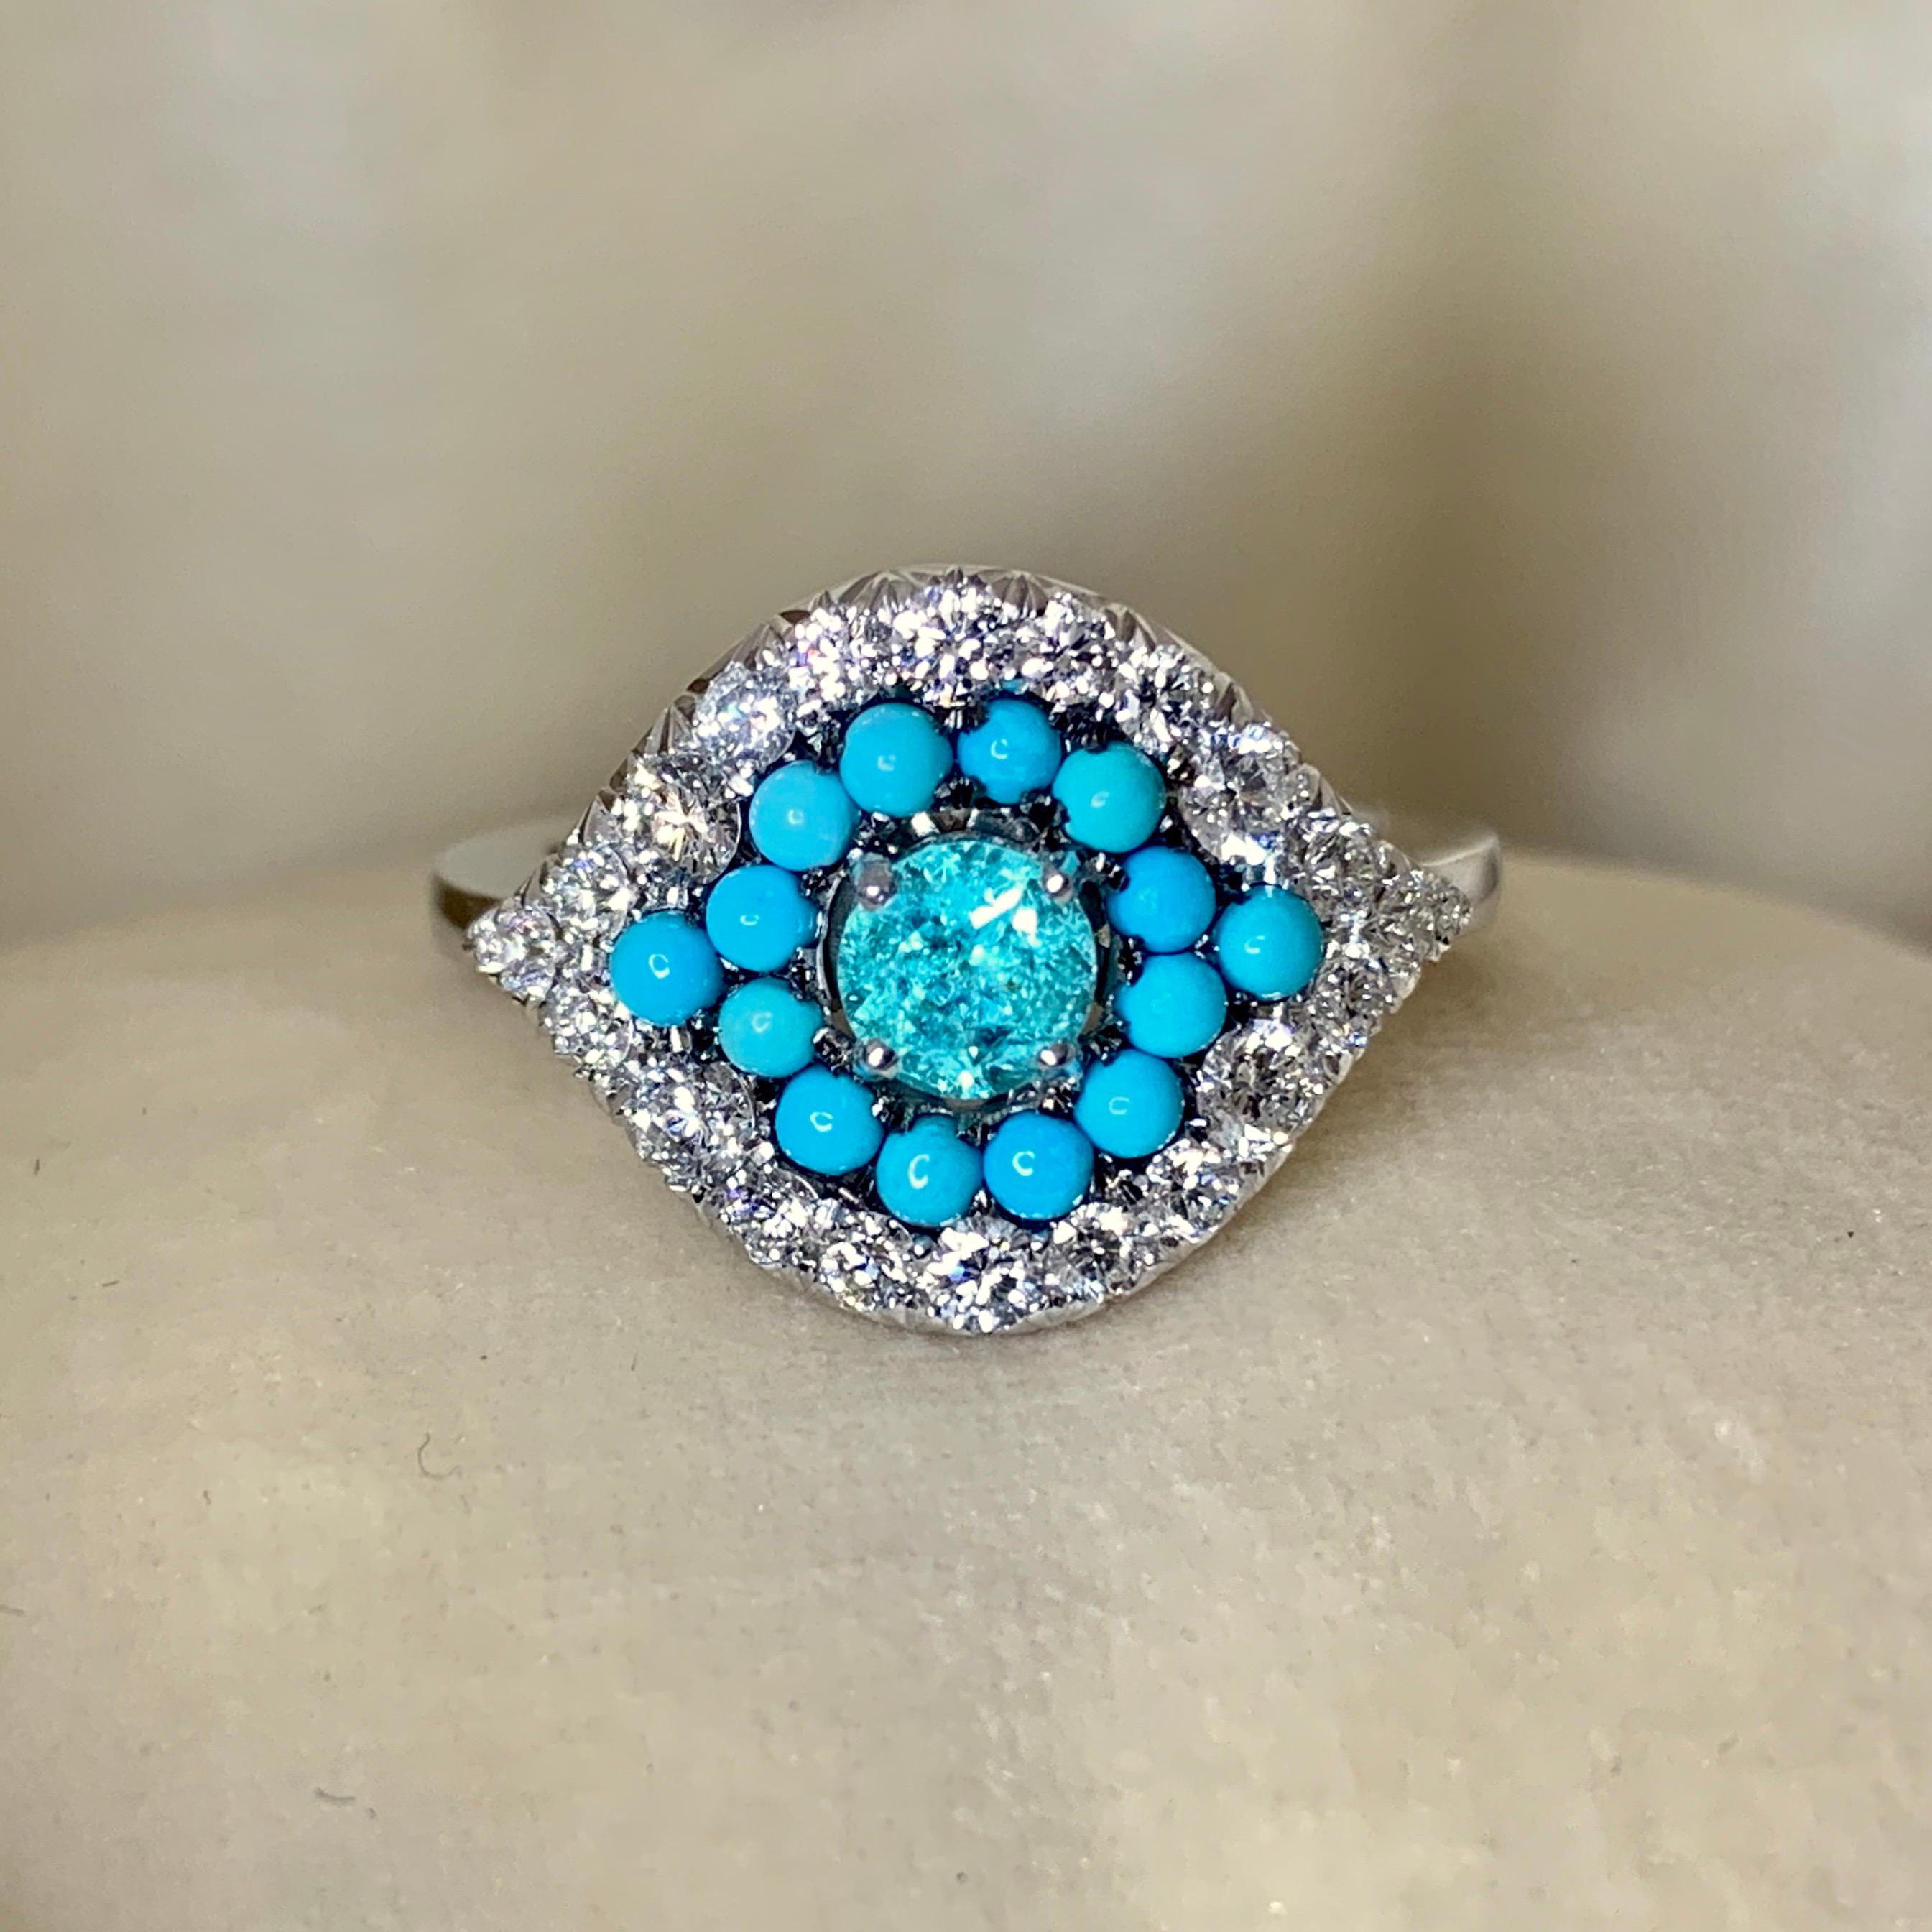 One of a kind ring handmade in Belgium from jewellery designer Joke Quick, in 18K White gold 9,7 g. Set with a Paraiba Tourmaline centerstone 0,39 Carat., Turquoise cabochons, White brilliant-cut diamonds DEGVVS 0,71 ct.;  Handmade the traditional